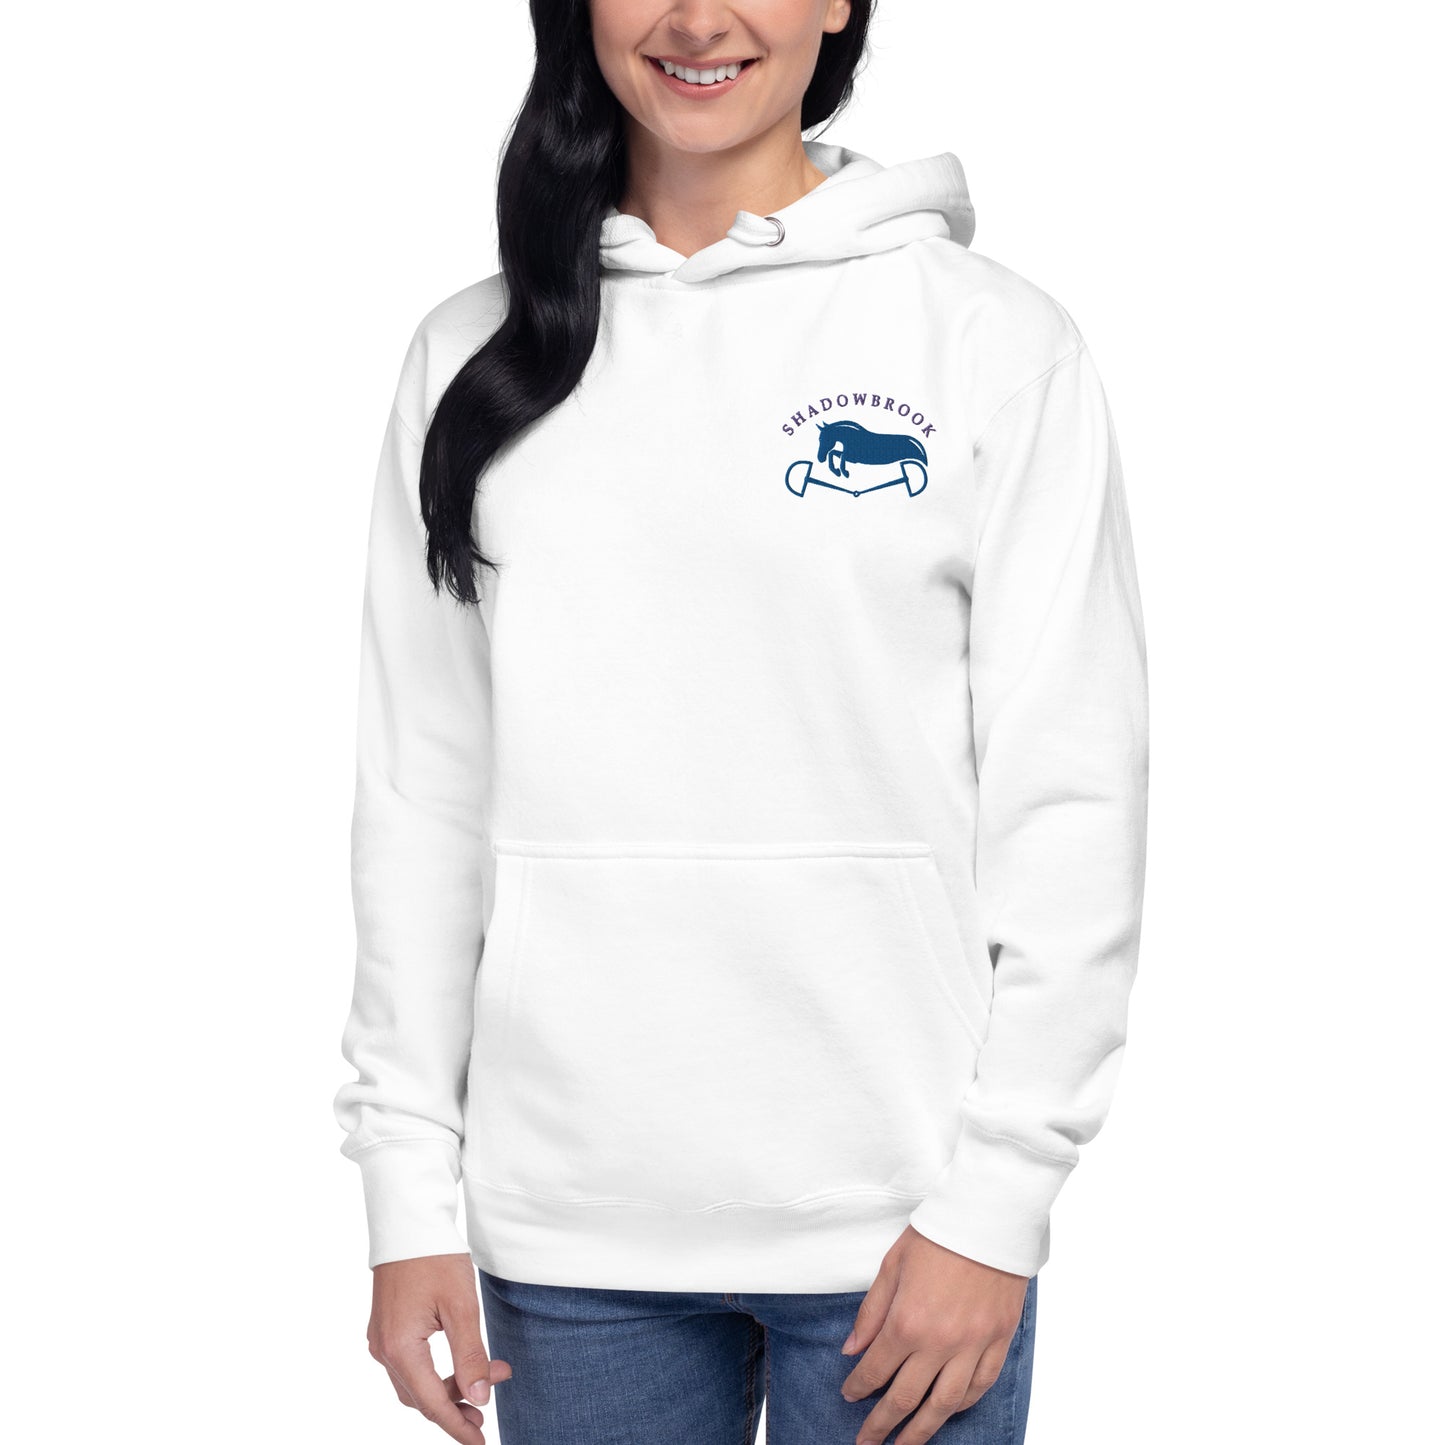 Shadowbrook Stables White Unisex Hoodie - Small Logo Front